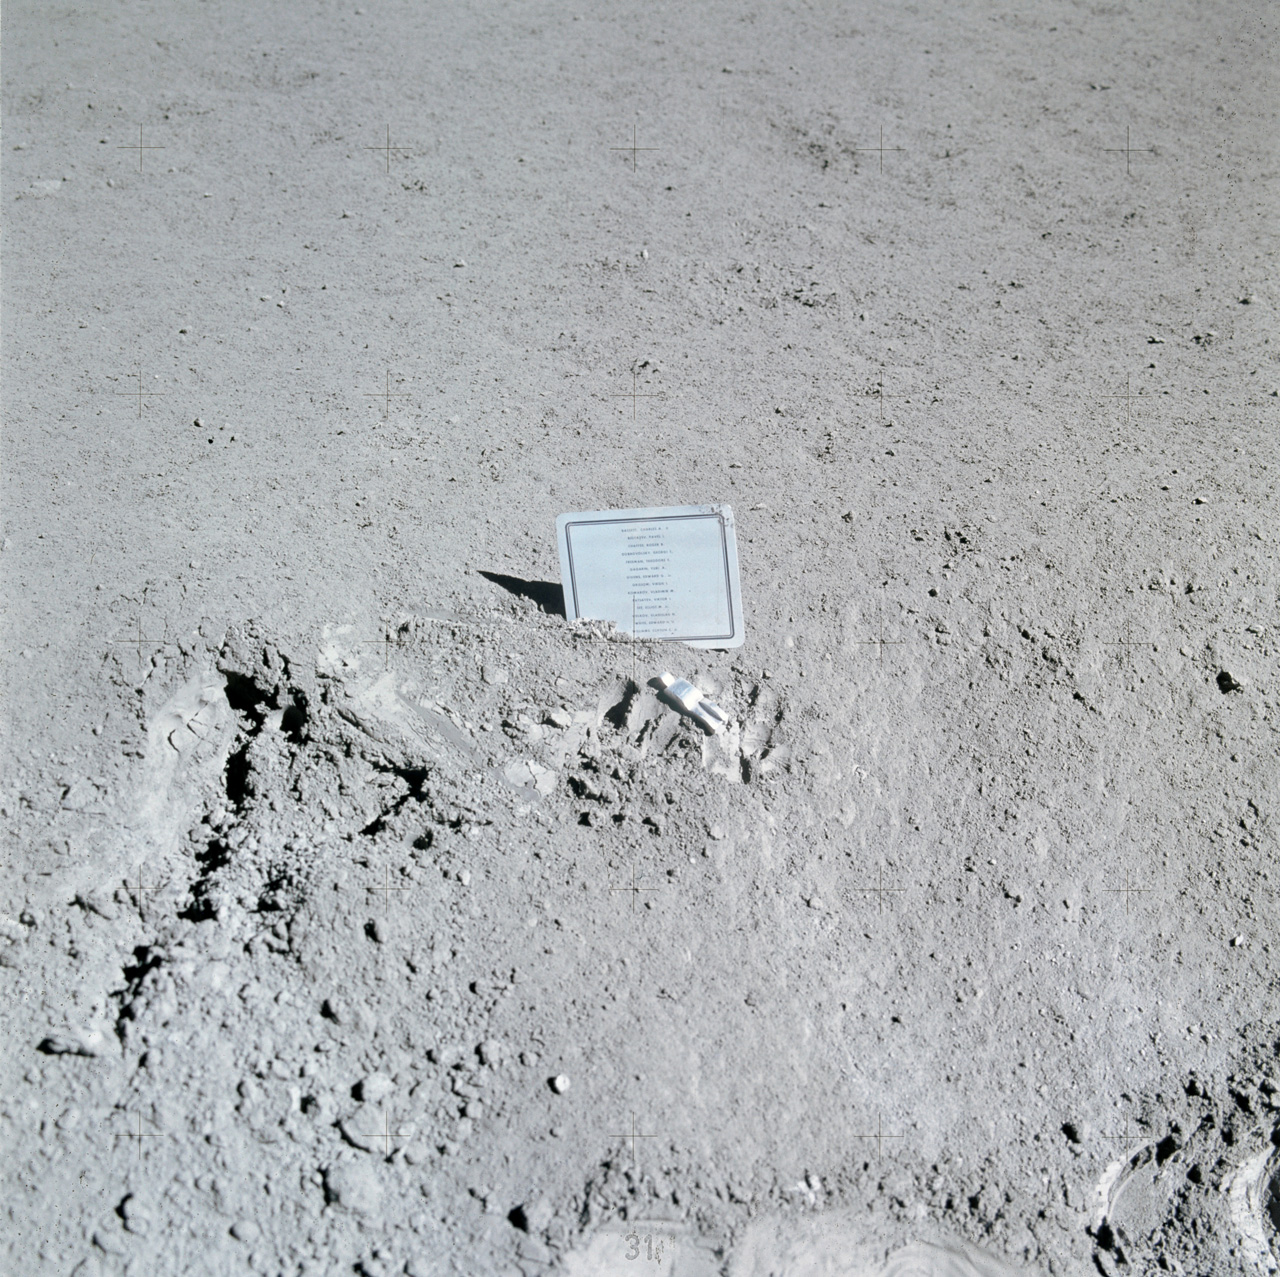 List of names and small figurine in the lunar dust.